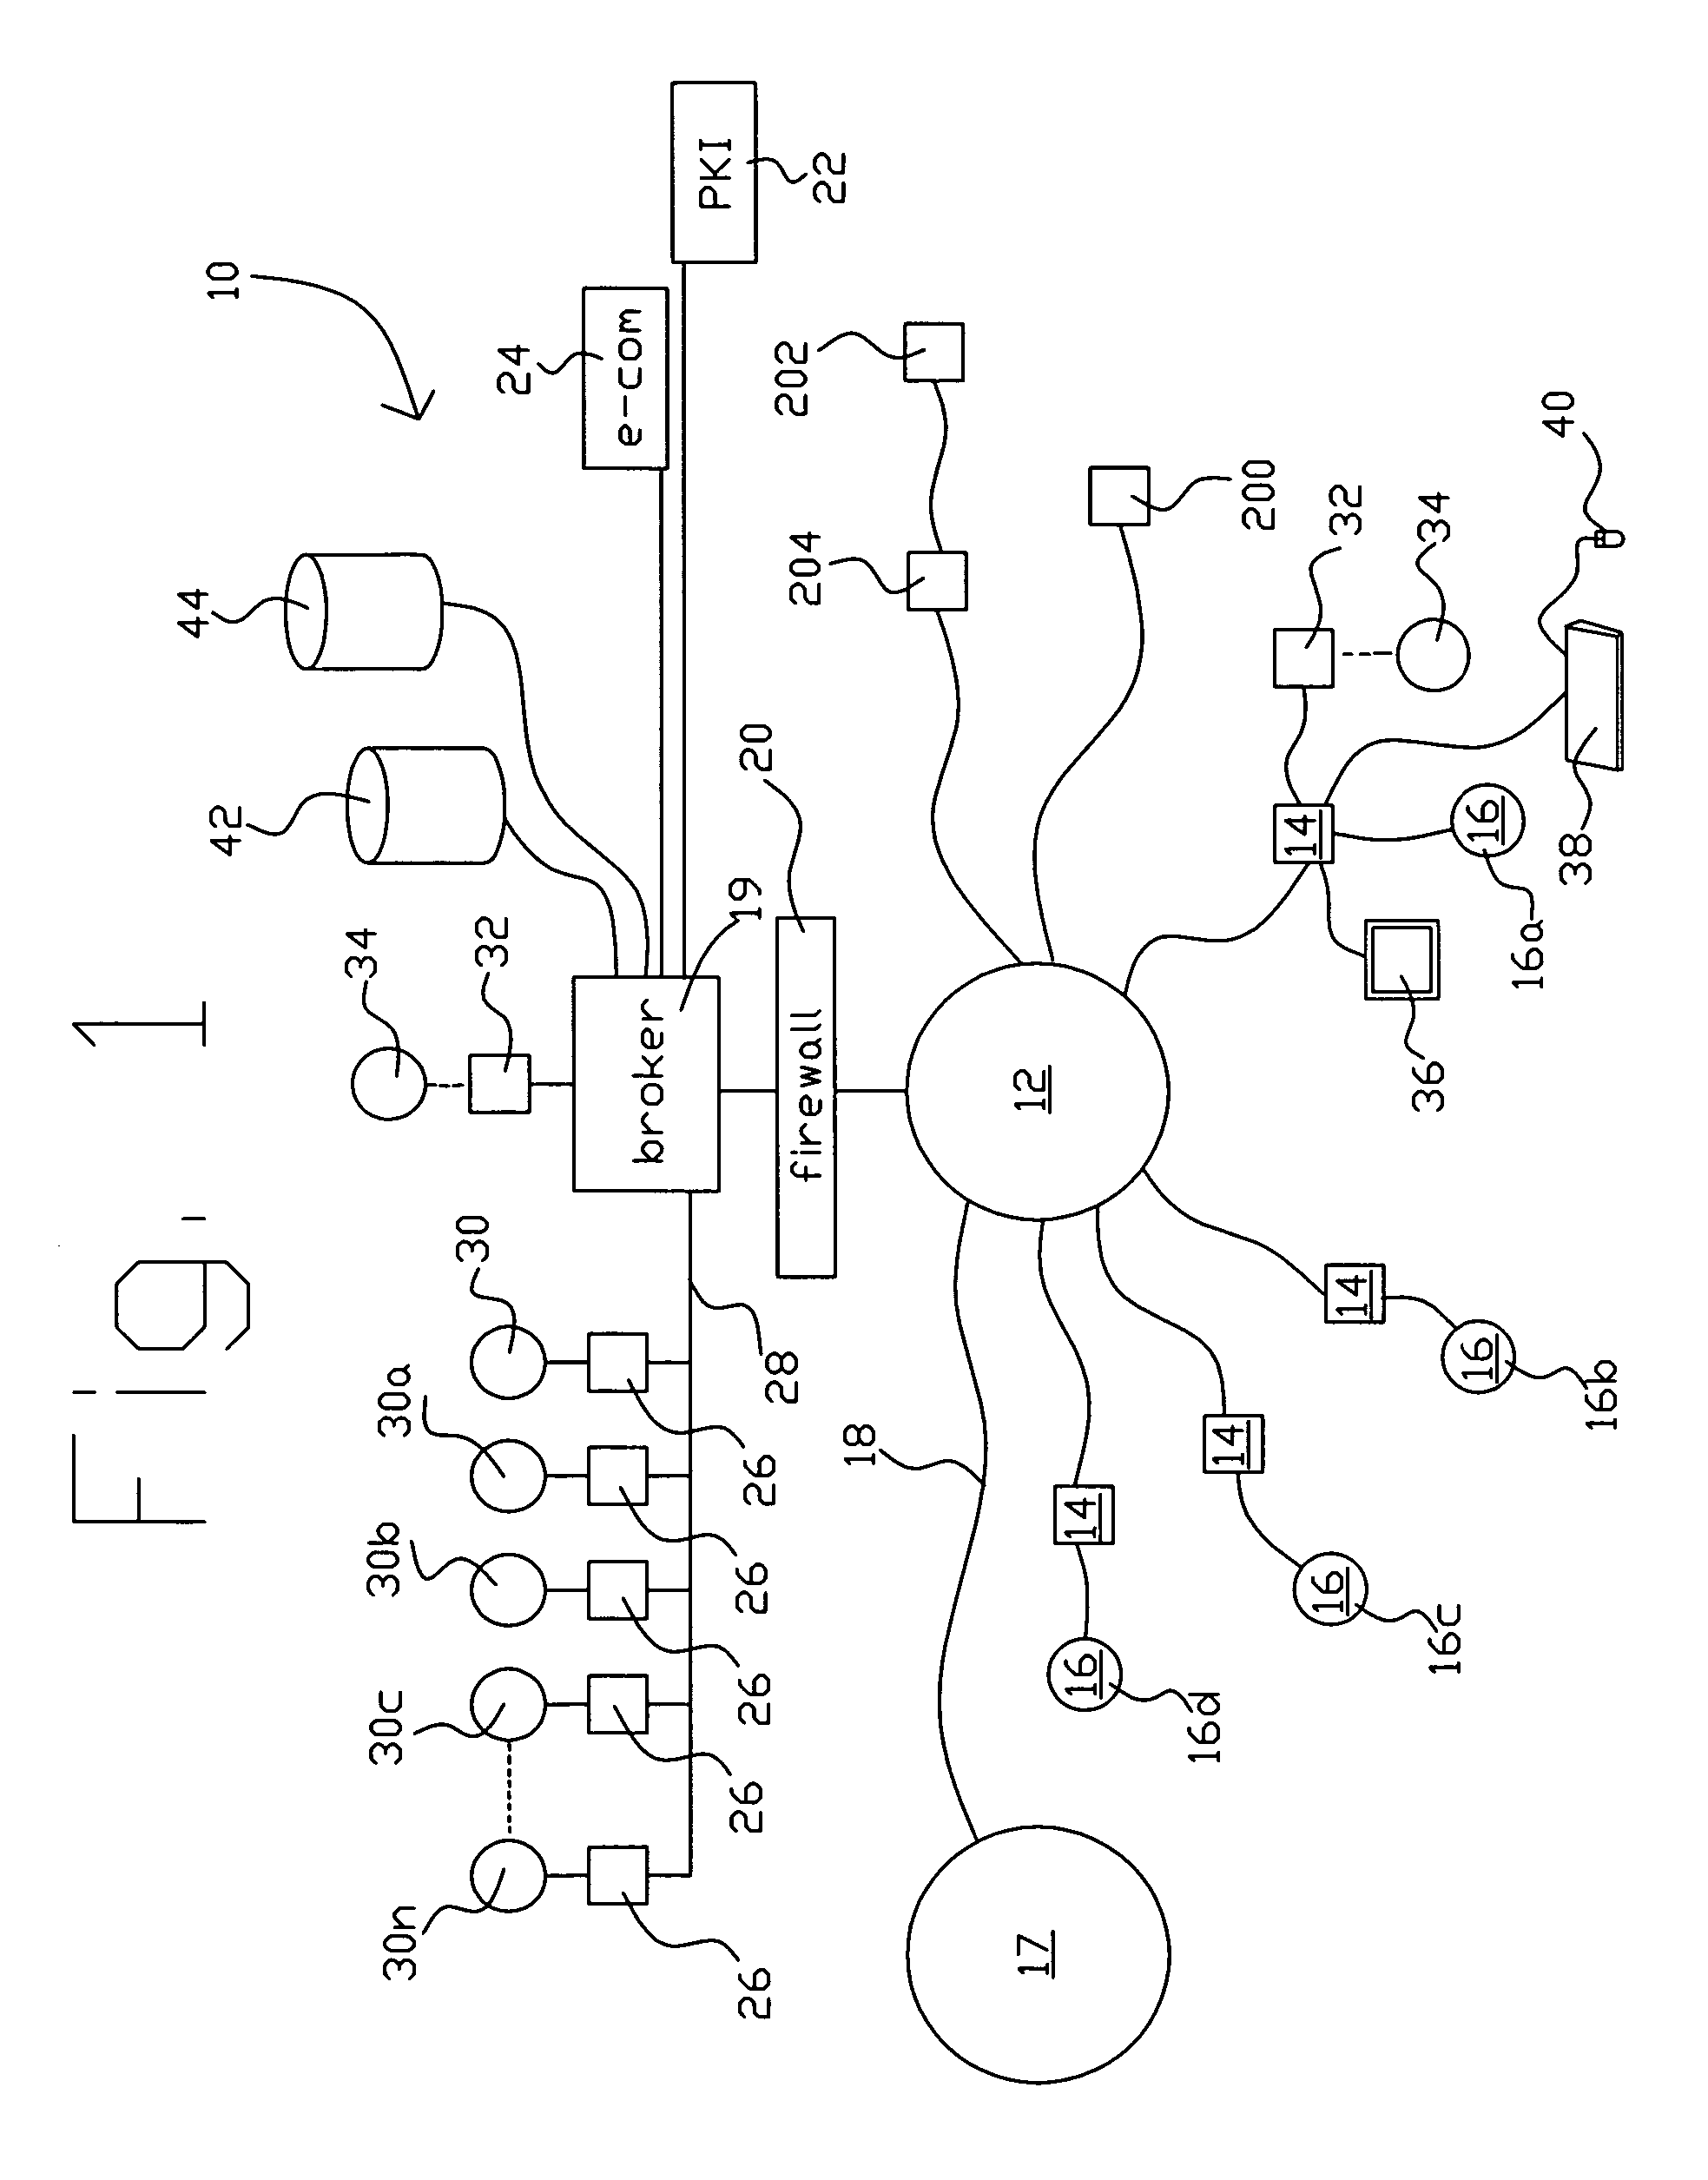 Apparatus and method for simulating artificial intelligence over computer networks